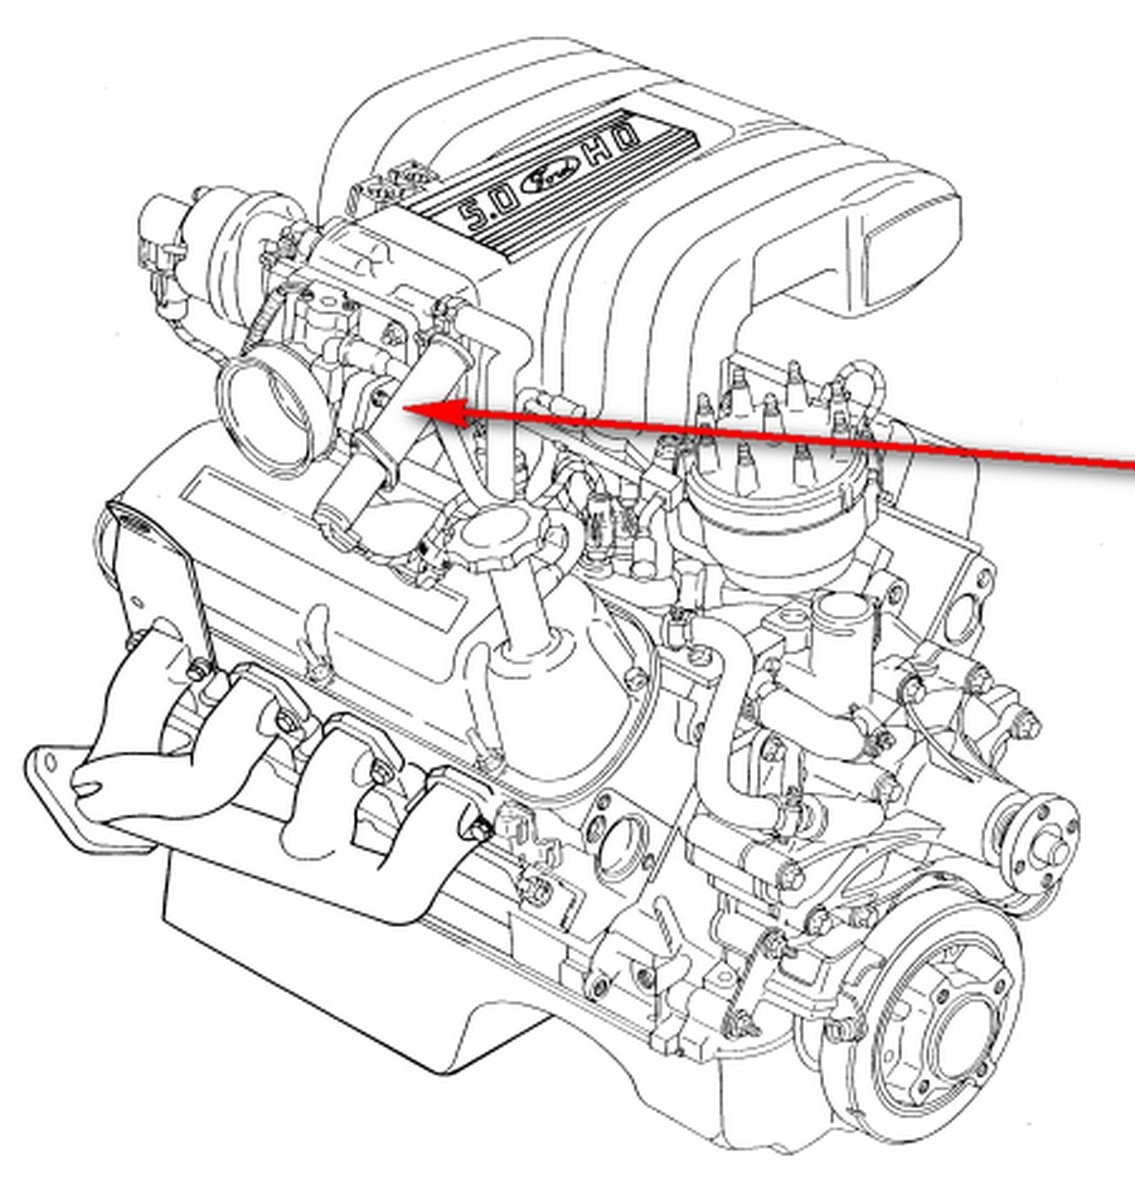 86 ford F-150 302 Engine Vacum Line Diagram My 1989 Mustang 302 Idles Rough and Stalls sometimes when at Stop Signs unless I Keep the Of 86 ford F-150 302 Engine Vacum Line Diagram